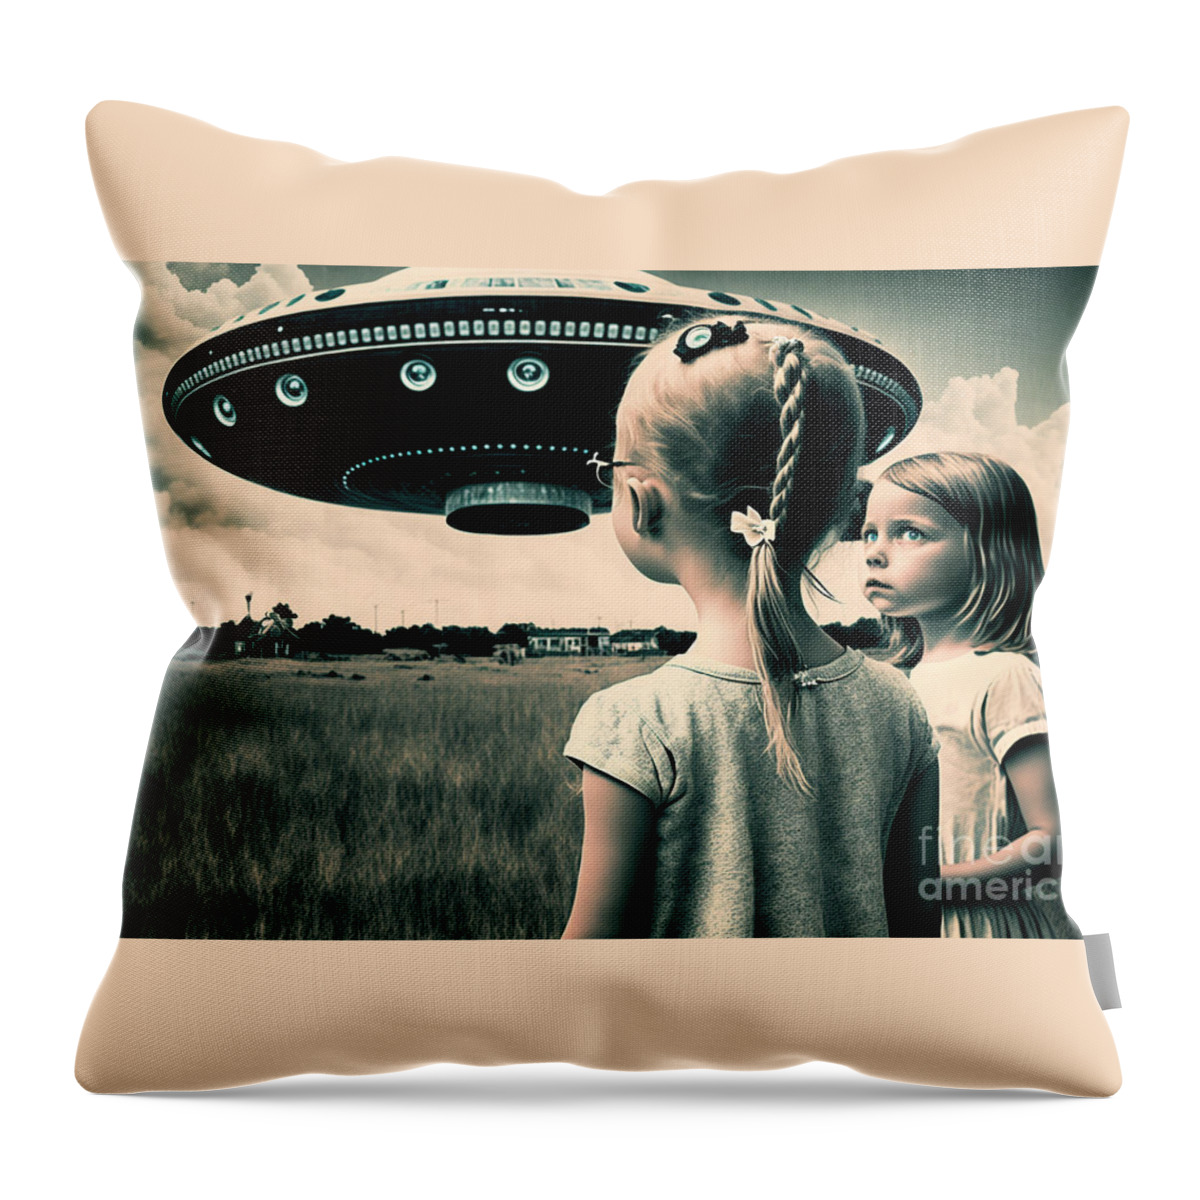 Ufo Throw Pillow featuring the digital art We Really Should Go Now by Jay Schankman